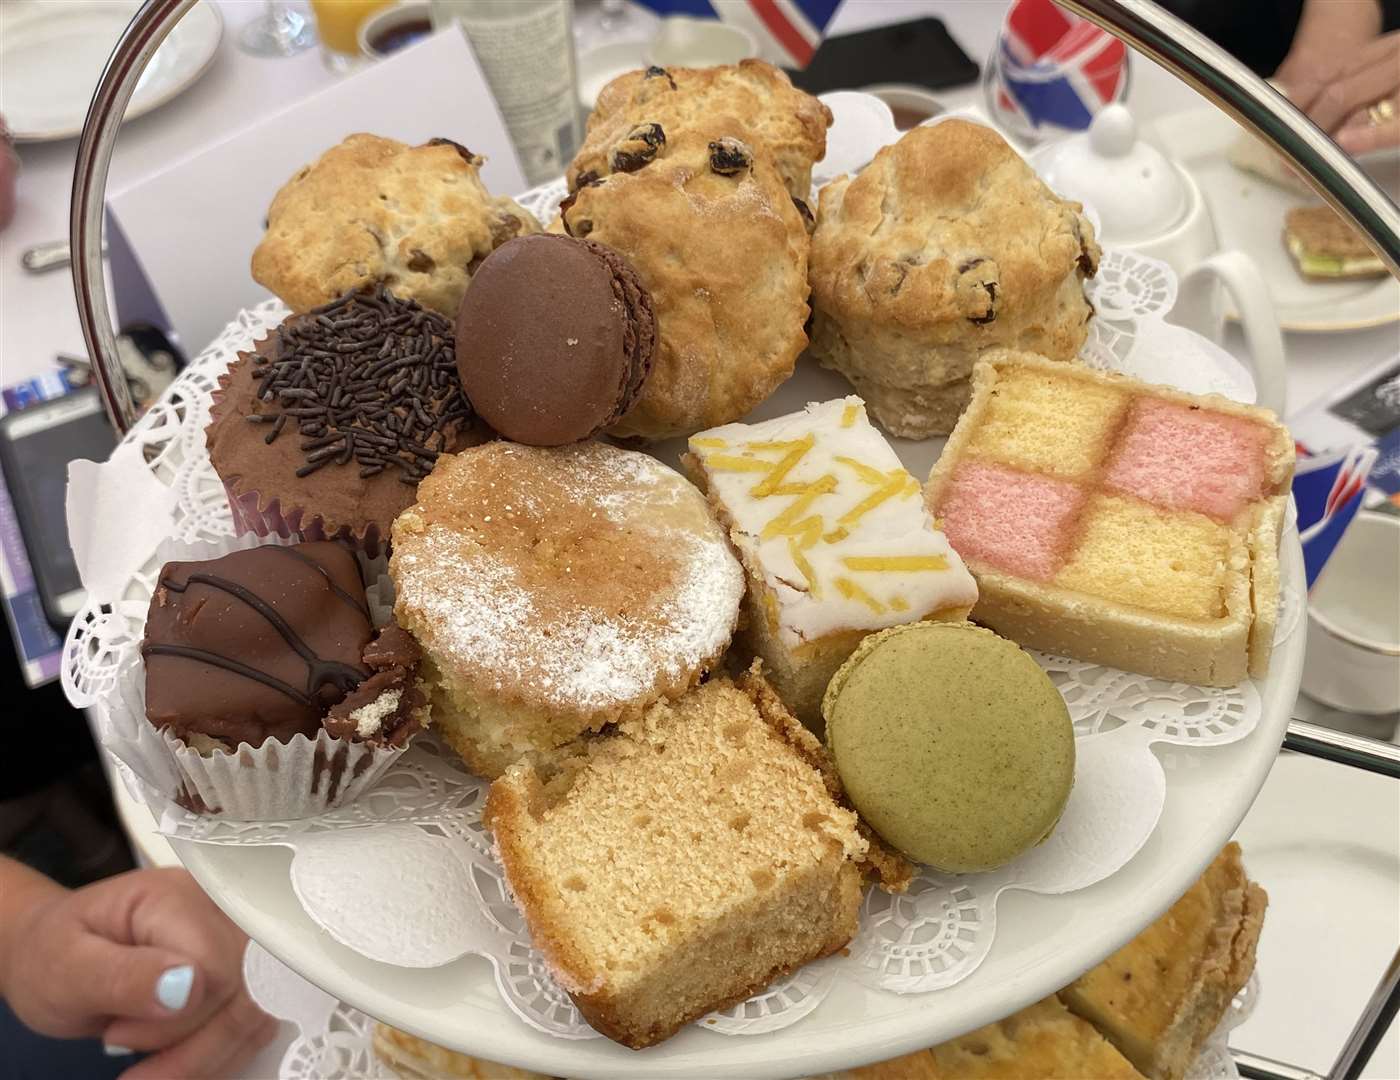 A variety of sandwiches and sweet treats were on offer, along with a cup of tea or two